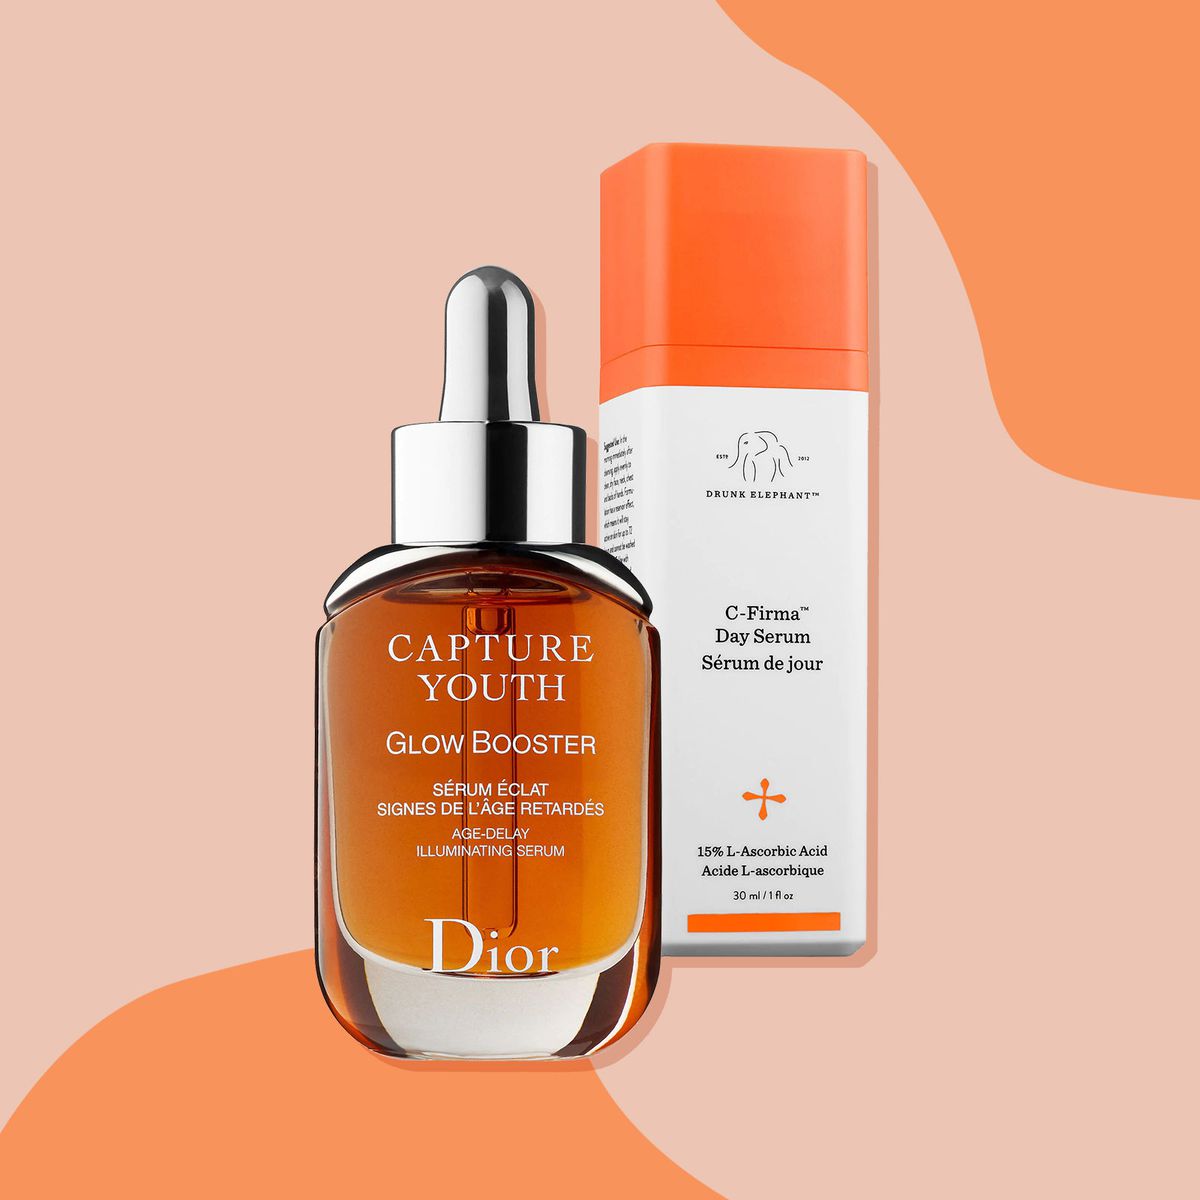 7 Vitamin C Serums That Could Transform Your Skin | InStyle